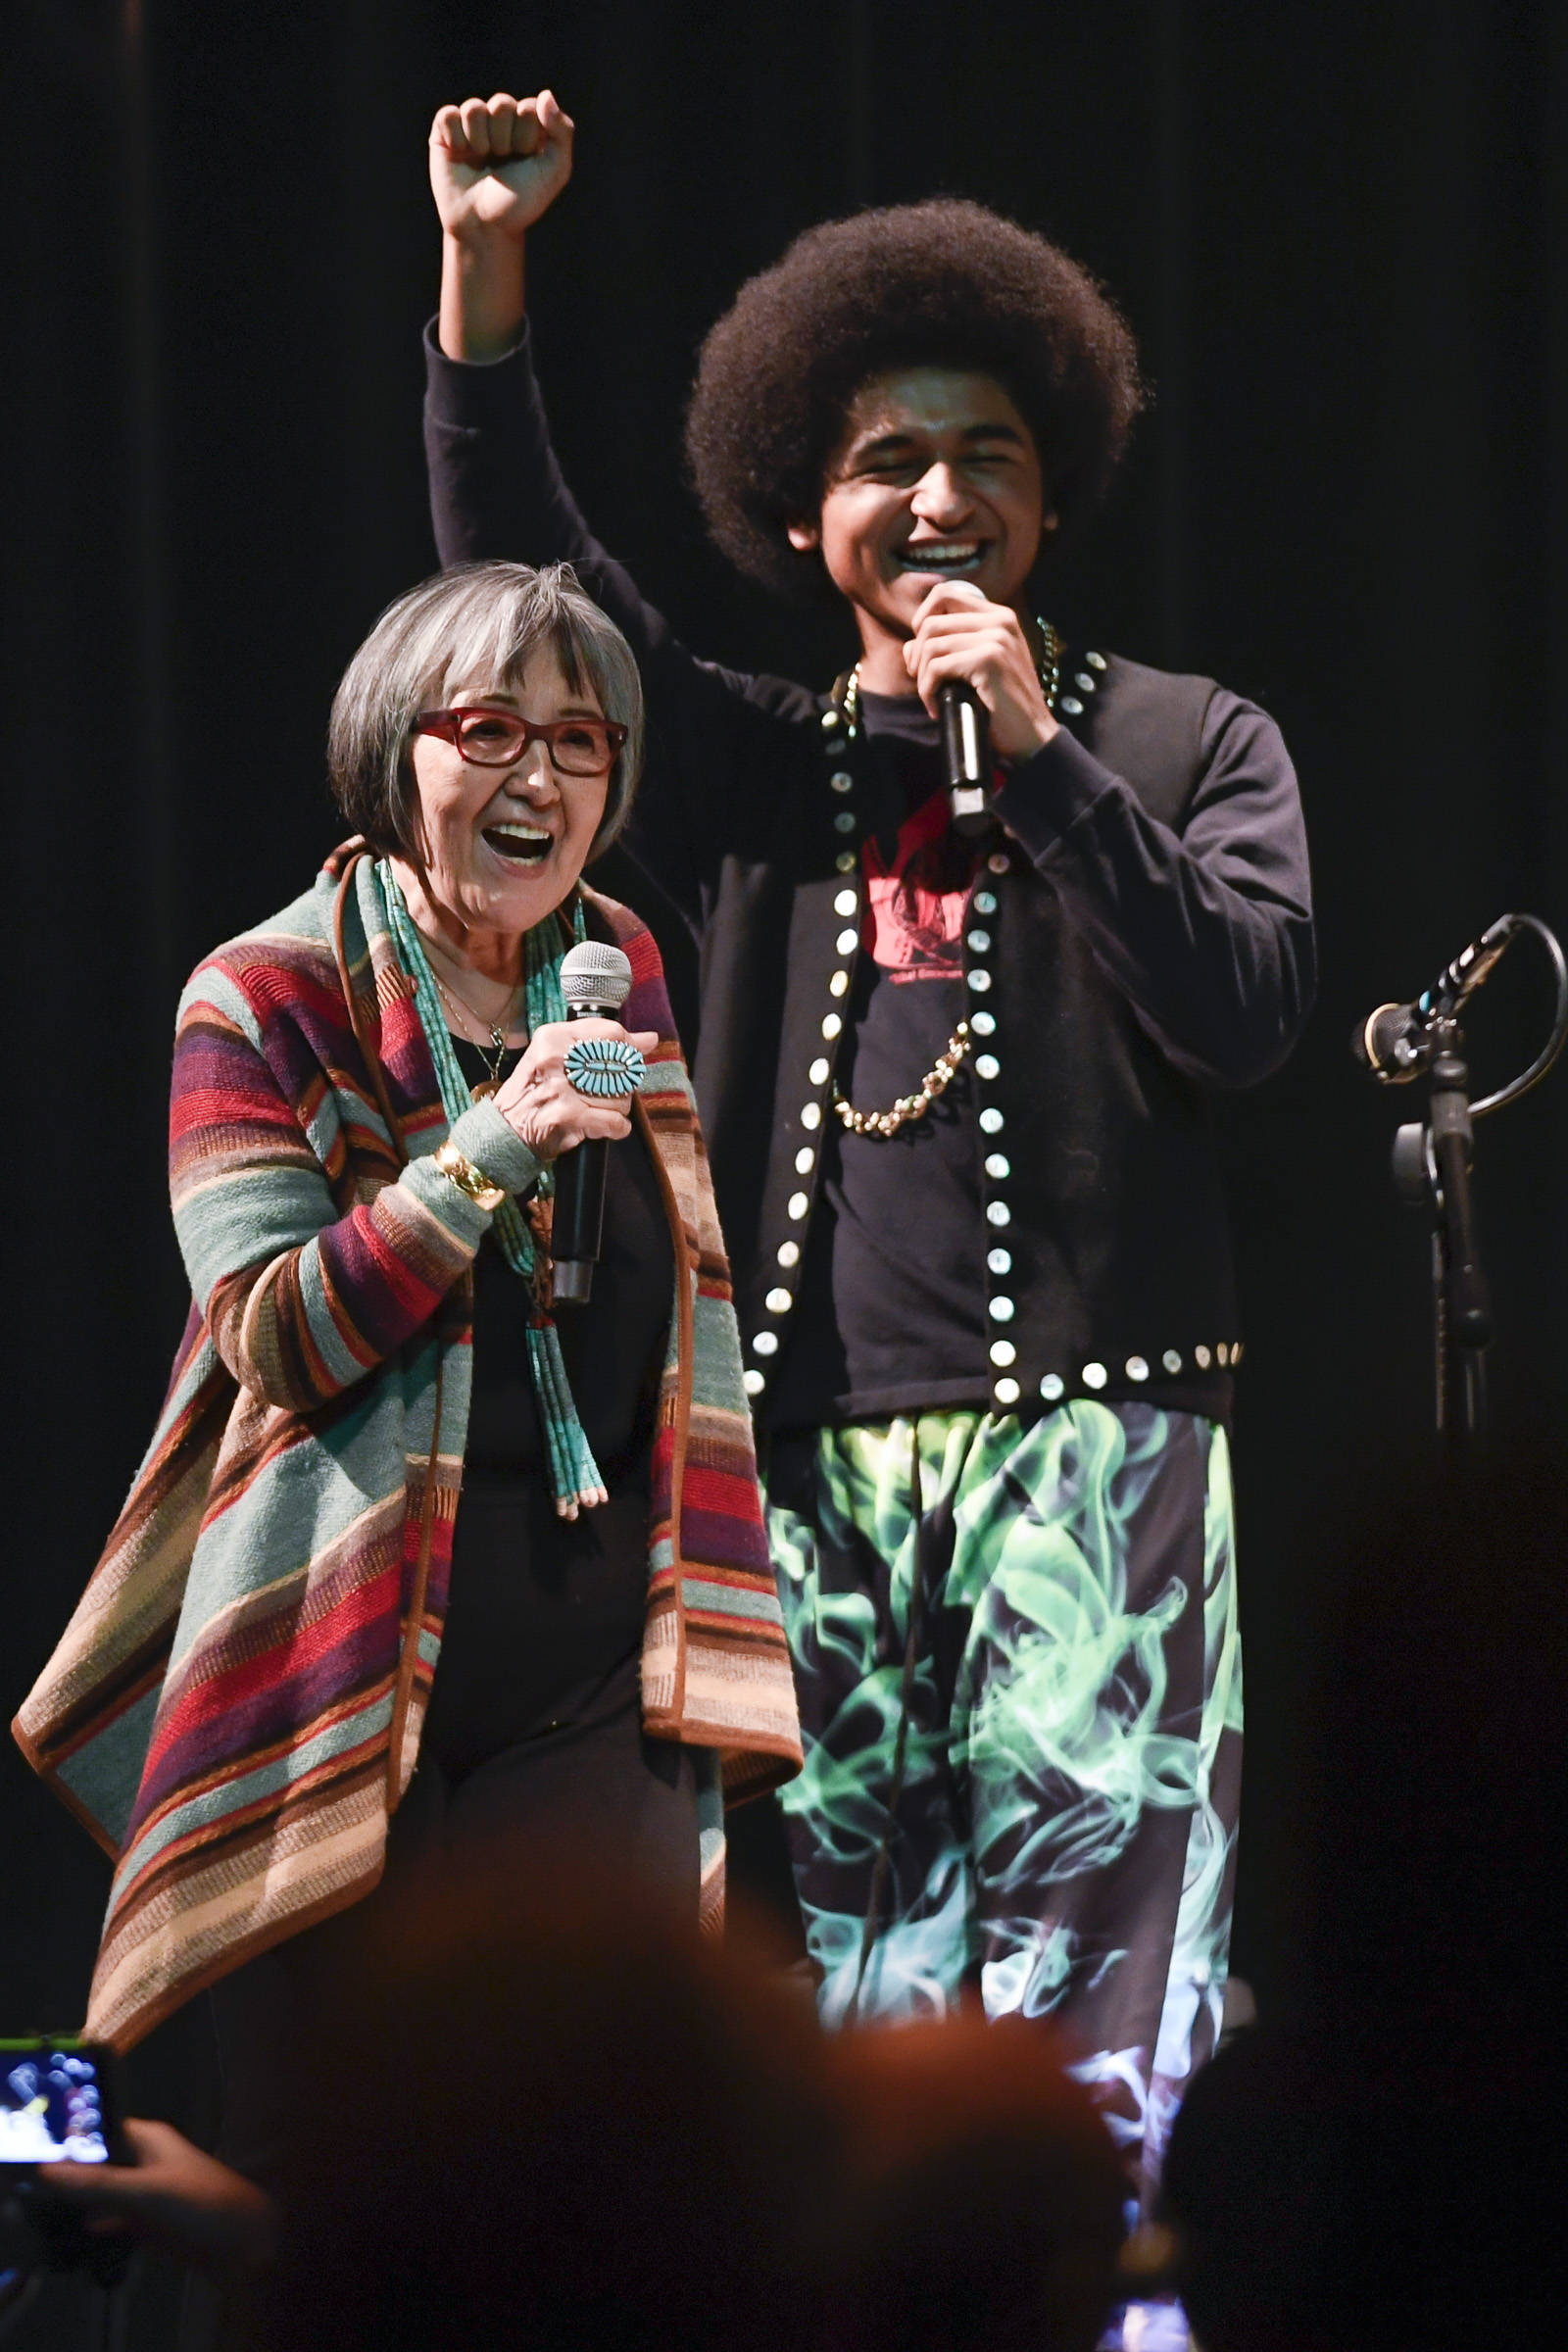 Rosita Worl, president of the Sealaska Heritage Institute, celebrates the perfomance of Hip Hop duo of Arias “A.J.” Hoyle, right, and Chris Talley as an opening act before Khu.eex’ performance at Centennial Hall on Monday, Jan. 28, 2019. (Michael Penn | Juneau Empire)